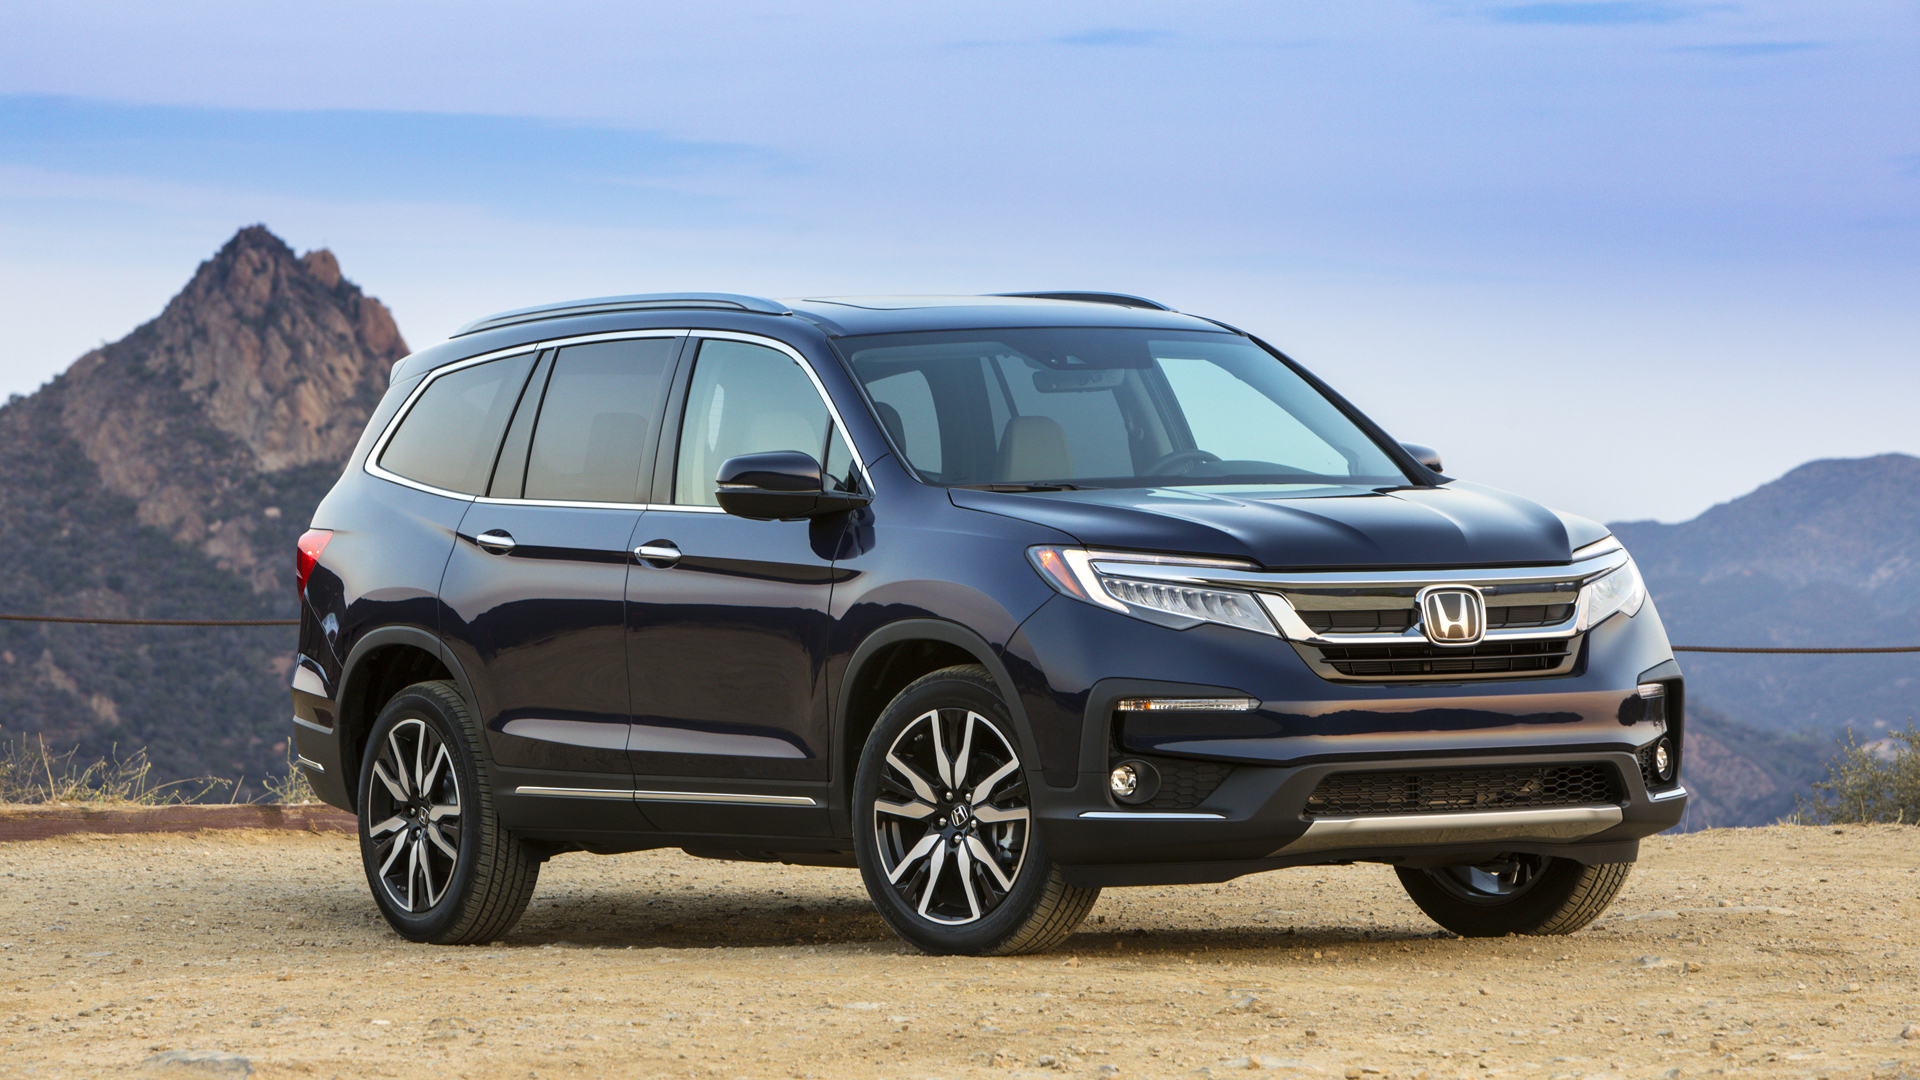 2021 Honda Pilot Review | What's new, prices, fuel economy, pictures ...